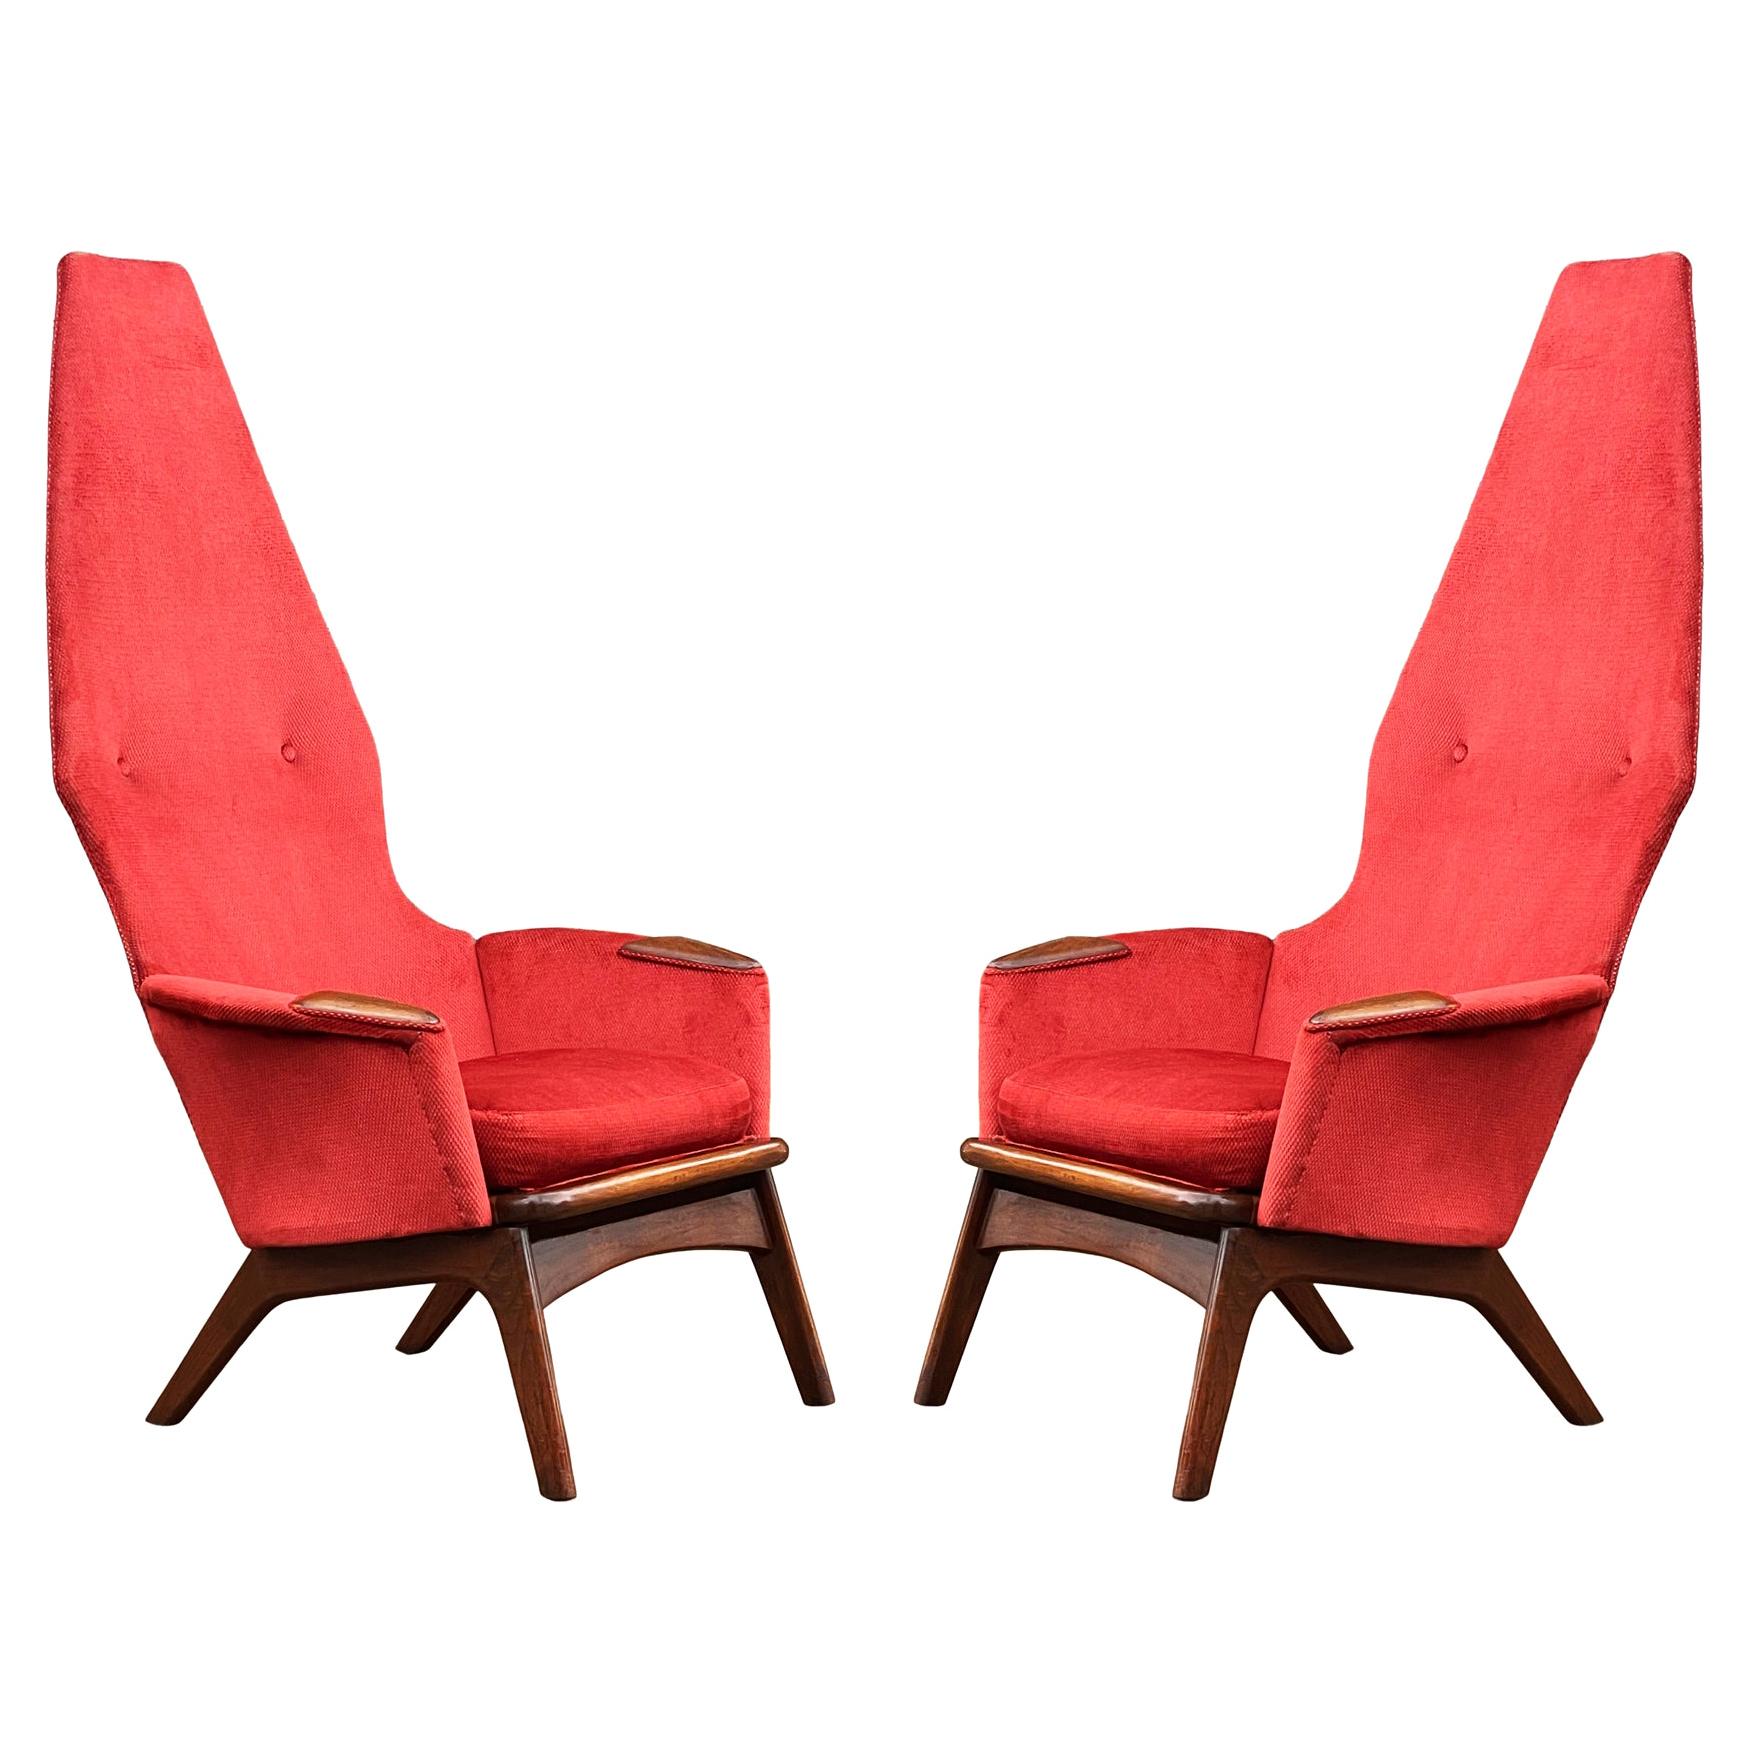 Pair Mid-Century Modern Sculptural High Back Lounge Chairs by Adrian Pearsall